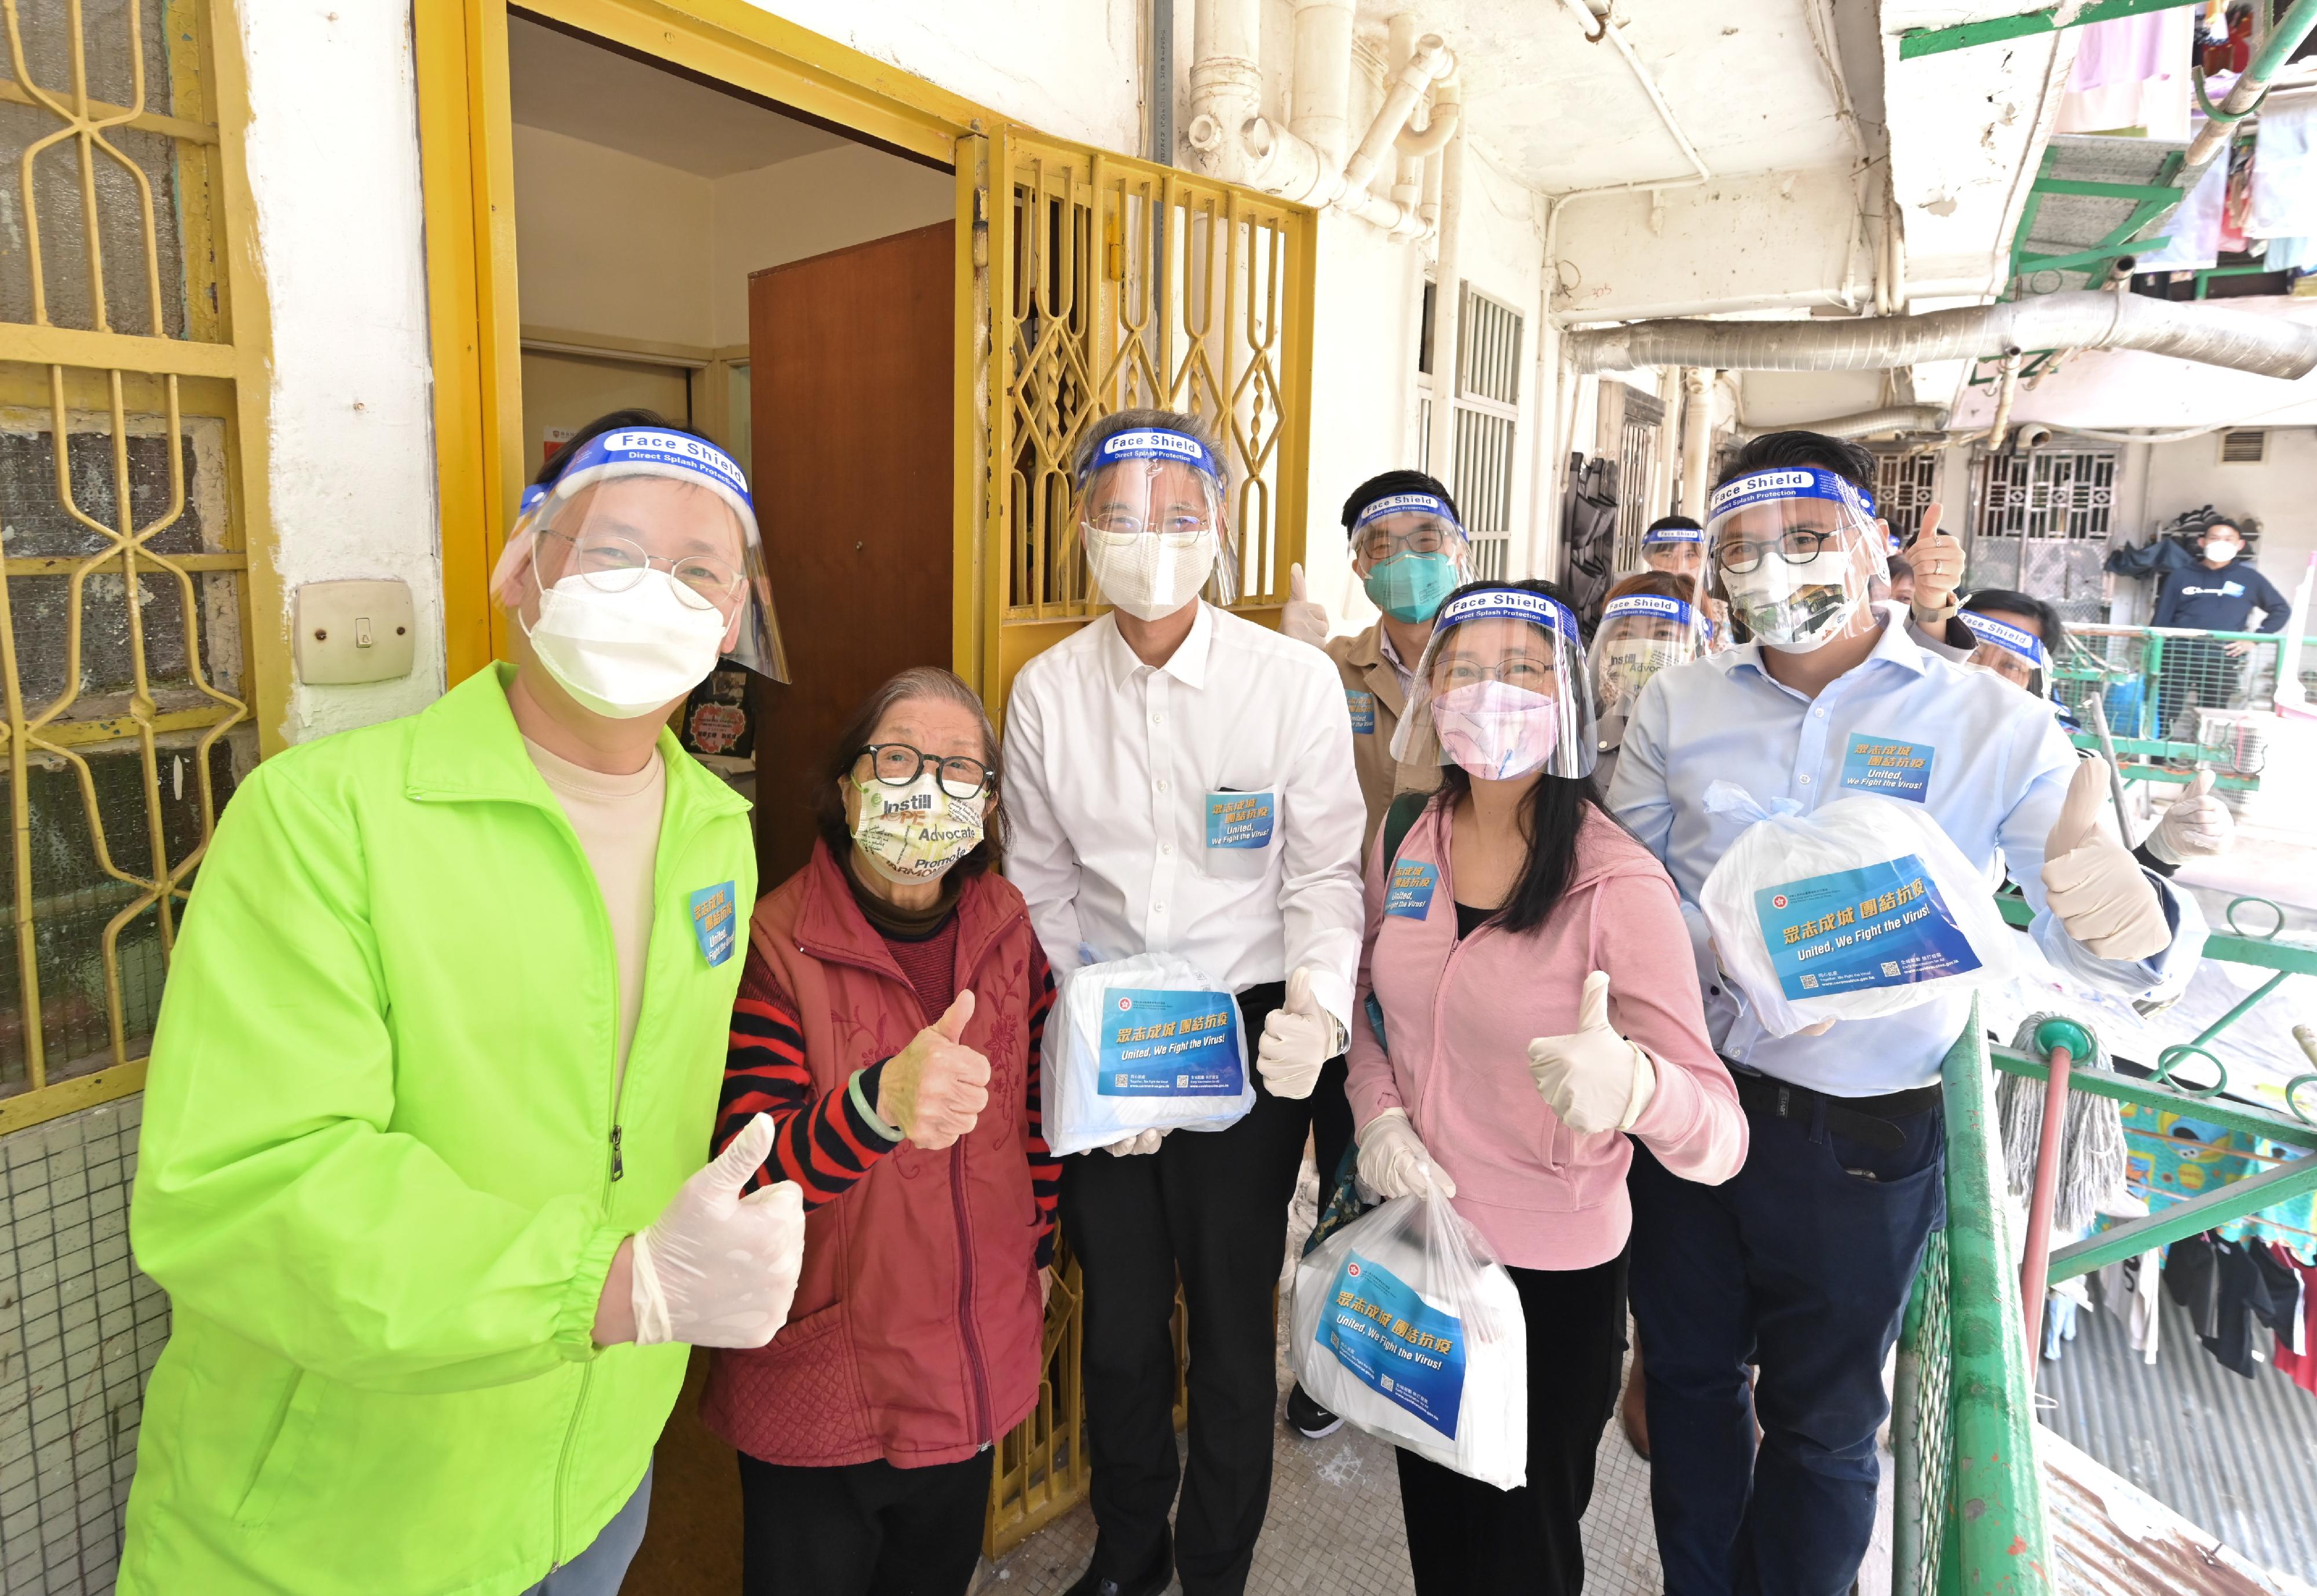 The Secretary for Labour and Welfare, Dr Law Chi-kwong, and the Permanent Secretary for Labour and Welfare, Ms Alice Lau, today (April 4) led their team to distribute anti-epidemic service bags to households in an old building in Kwun Tong District. Photo shows Dr Law (front row, centre); Ms Lau (front row, second right); the Chairman of Kwun Tong District Council, Mr Wilson Or (front row, first left); and the District Officer (Kwun Tong), Mr Steve Tse (front row, first right), delivering a service bag to an elderly singleton.